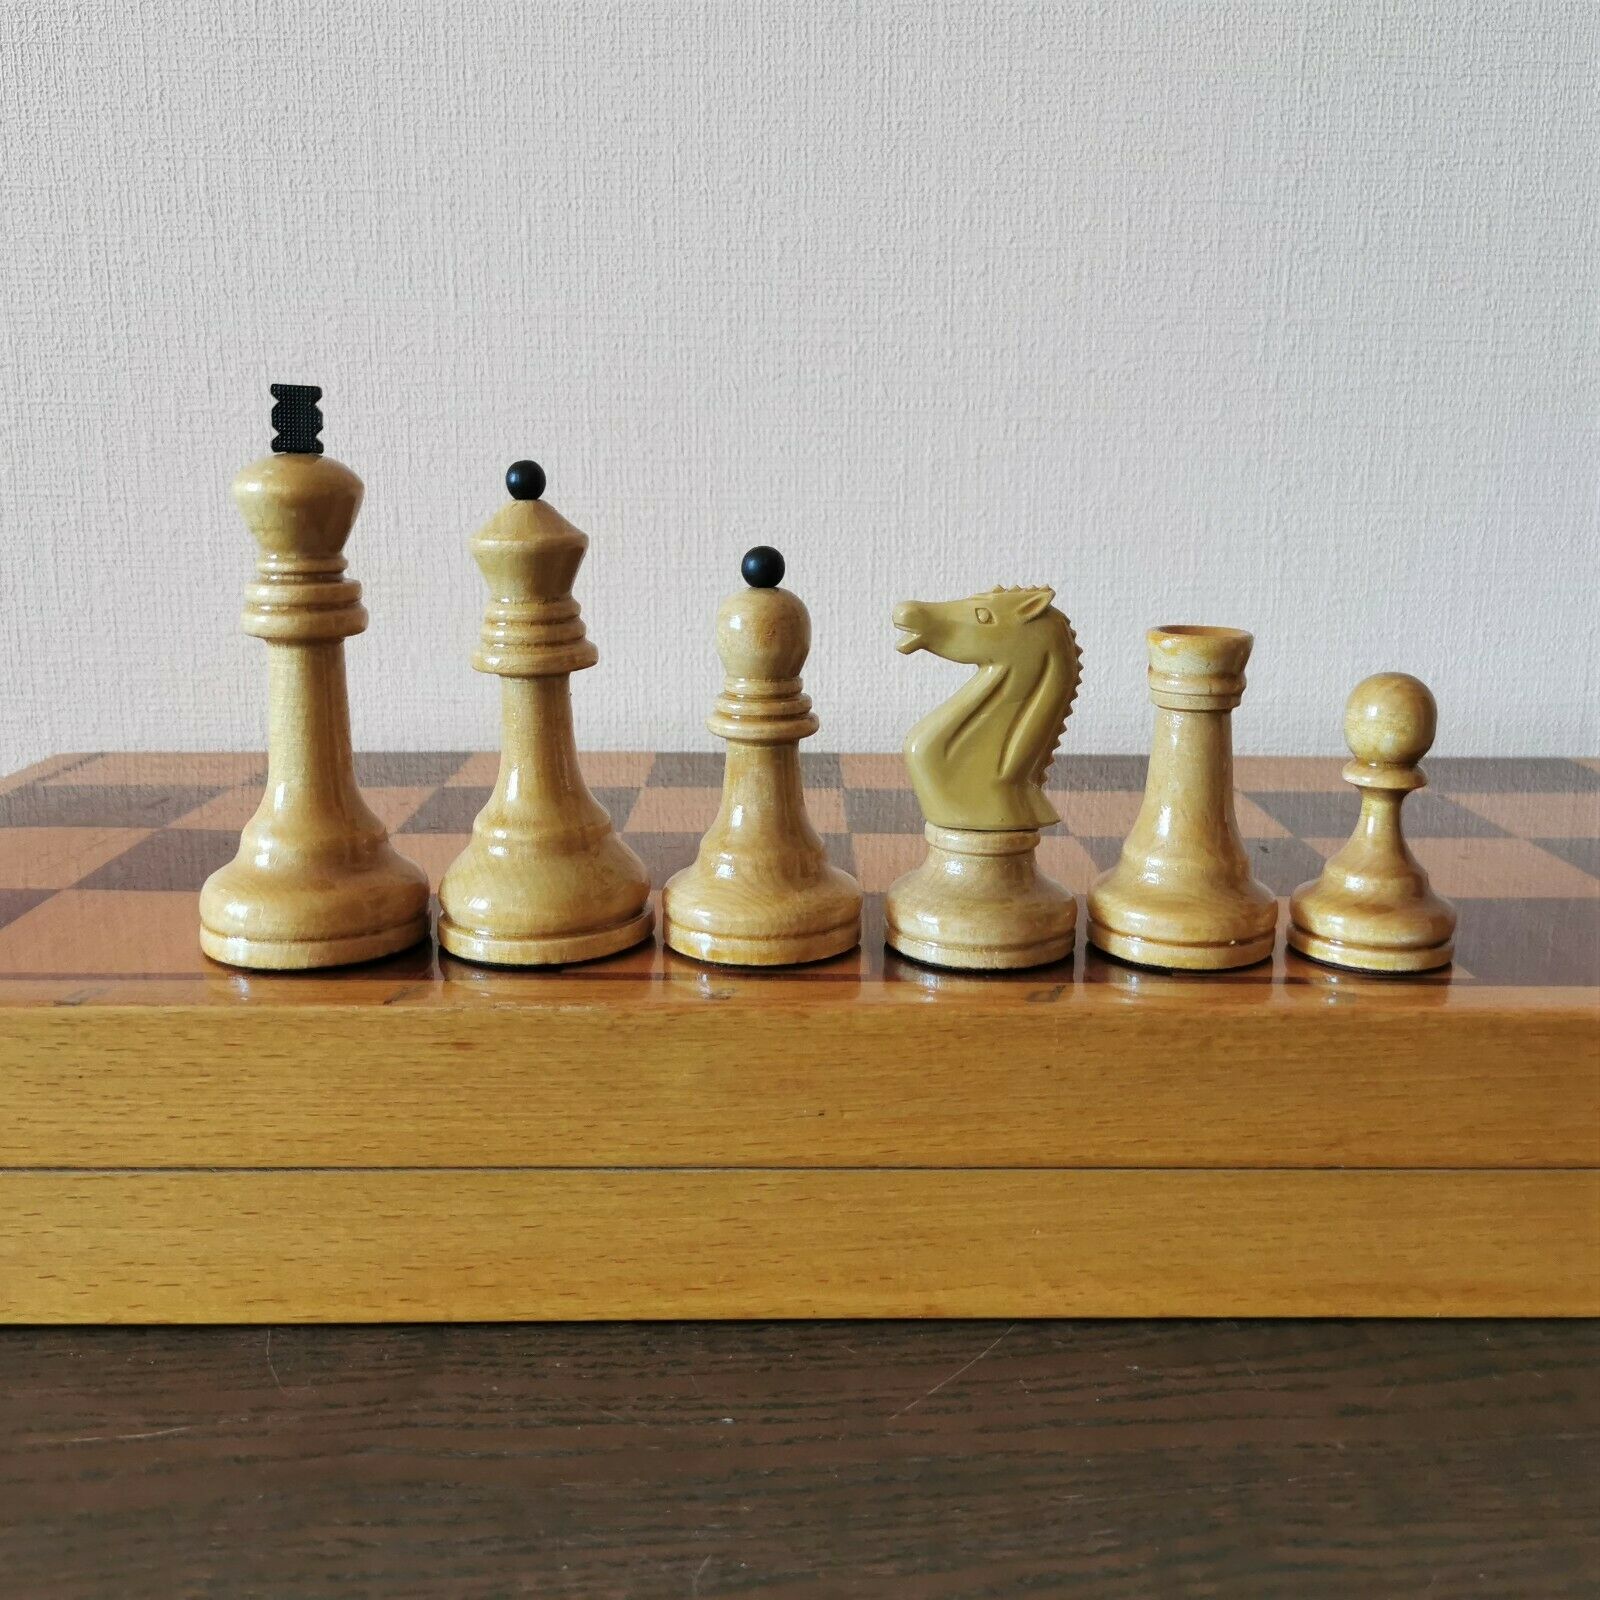 Soviet Weighted Grossmeister Chess Set Russia Vintage Ussr Antique Tournament